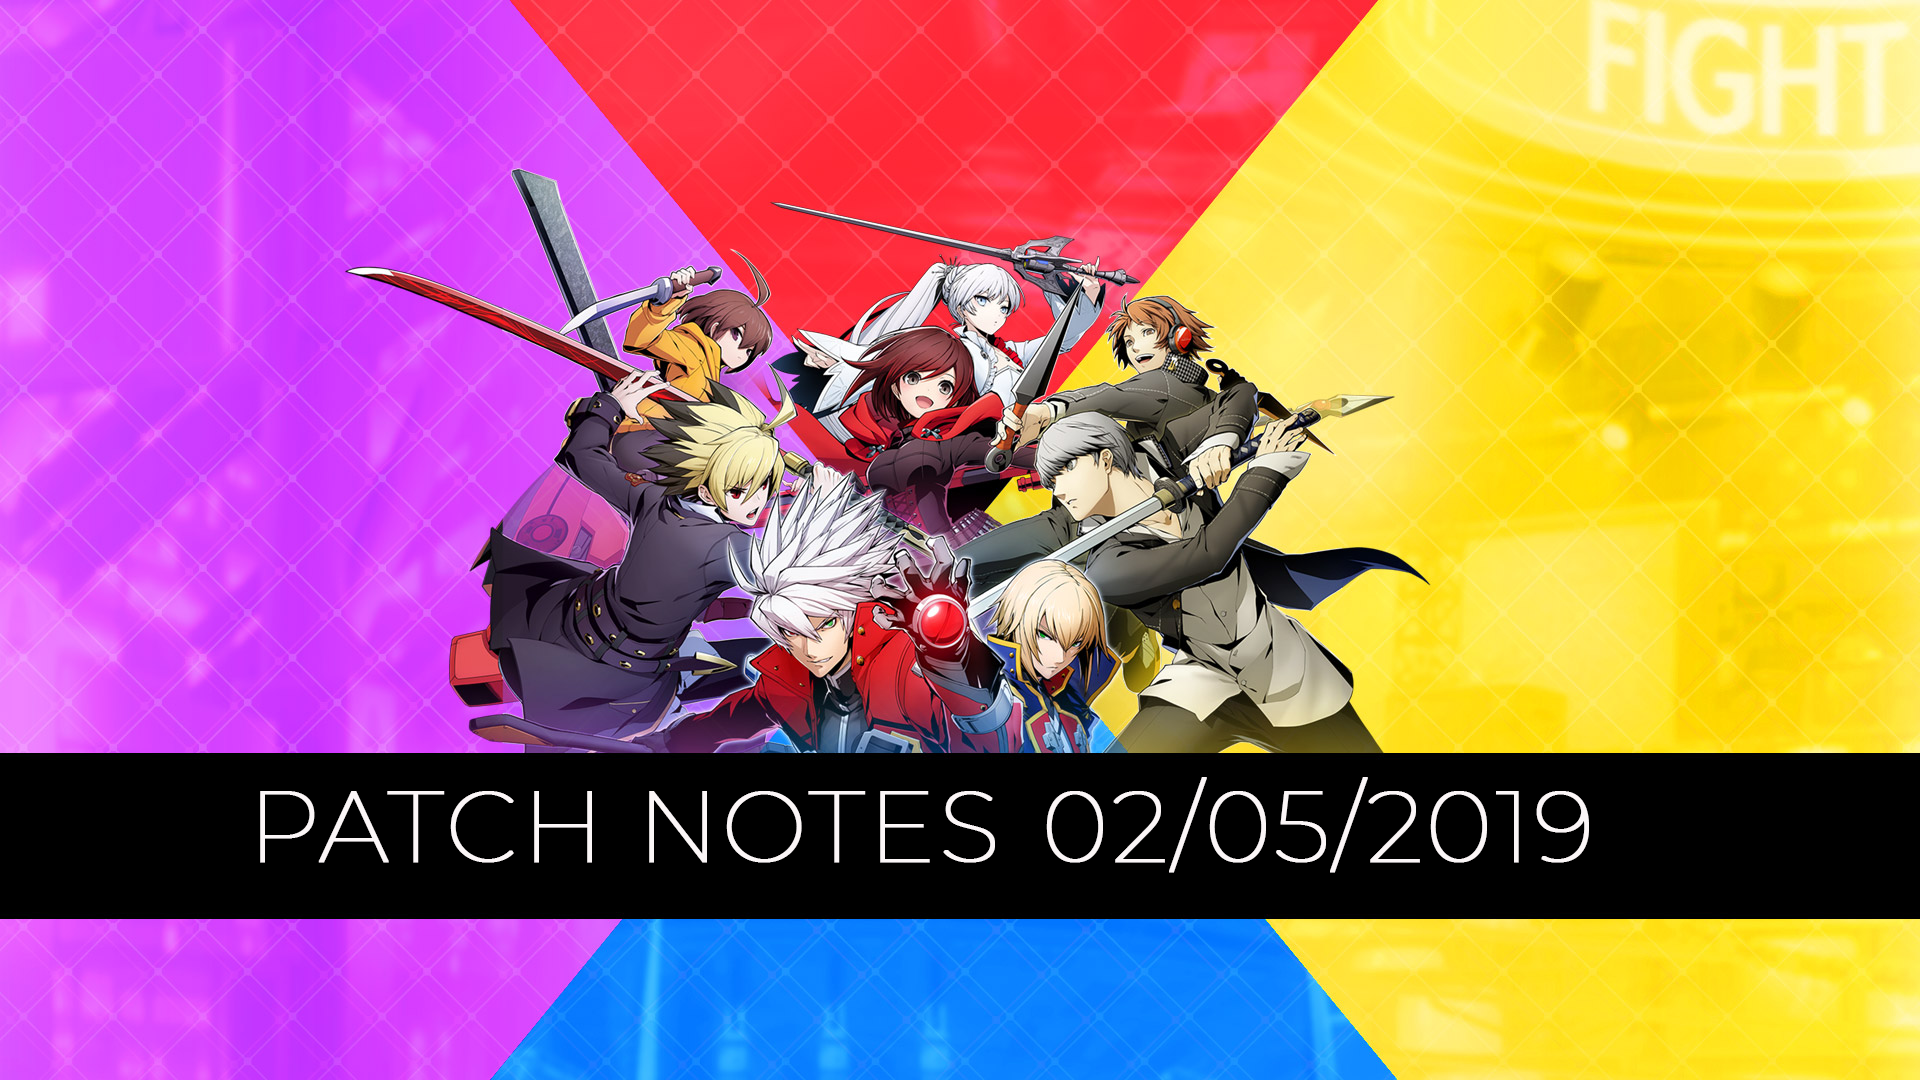 BlazBlue: Cross Tag Battle 02/05 Patch Notes